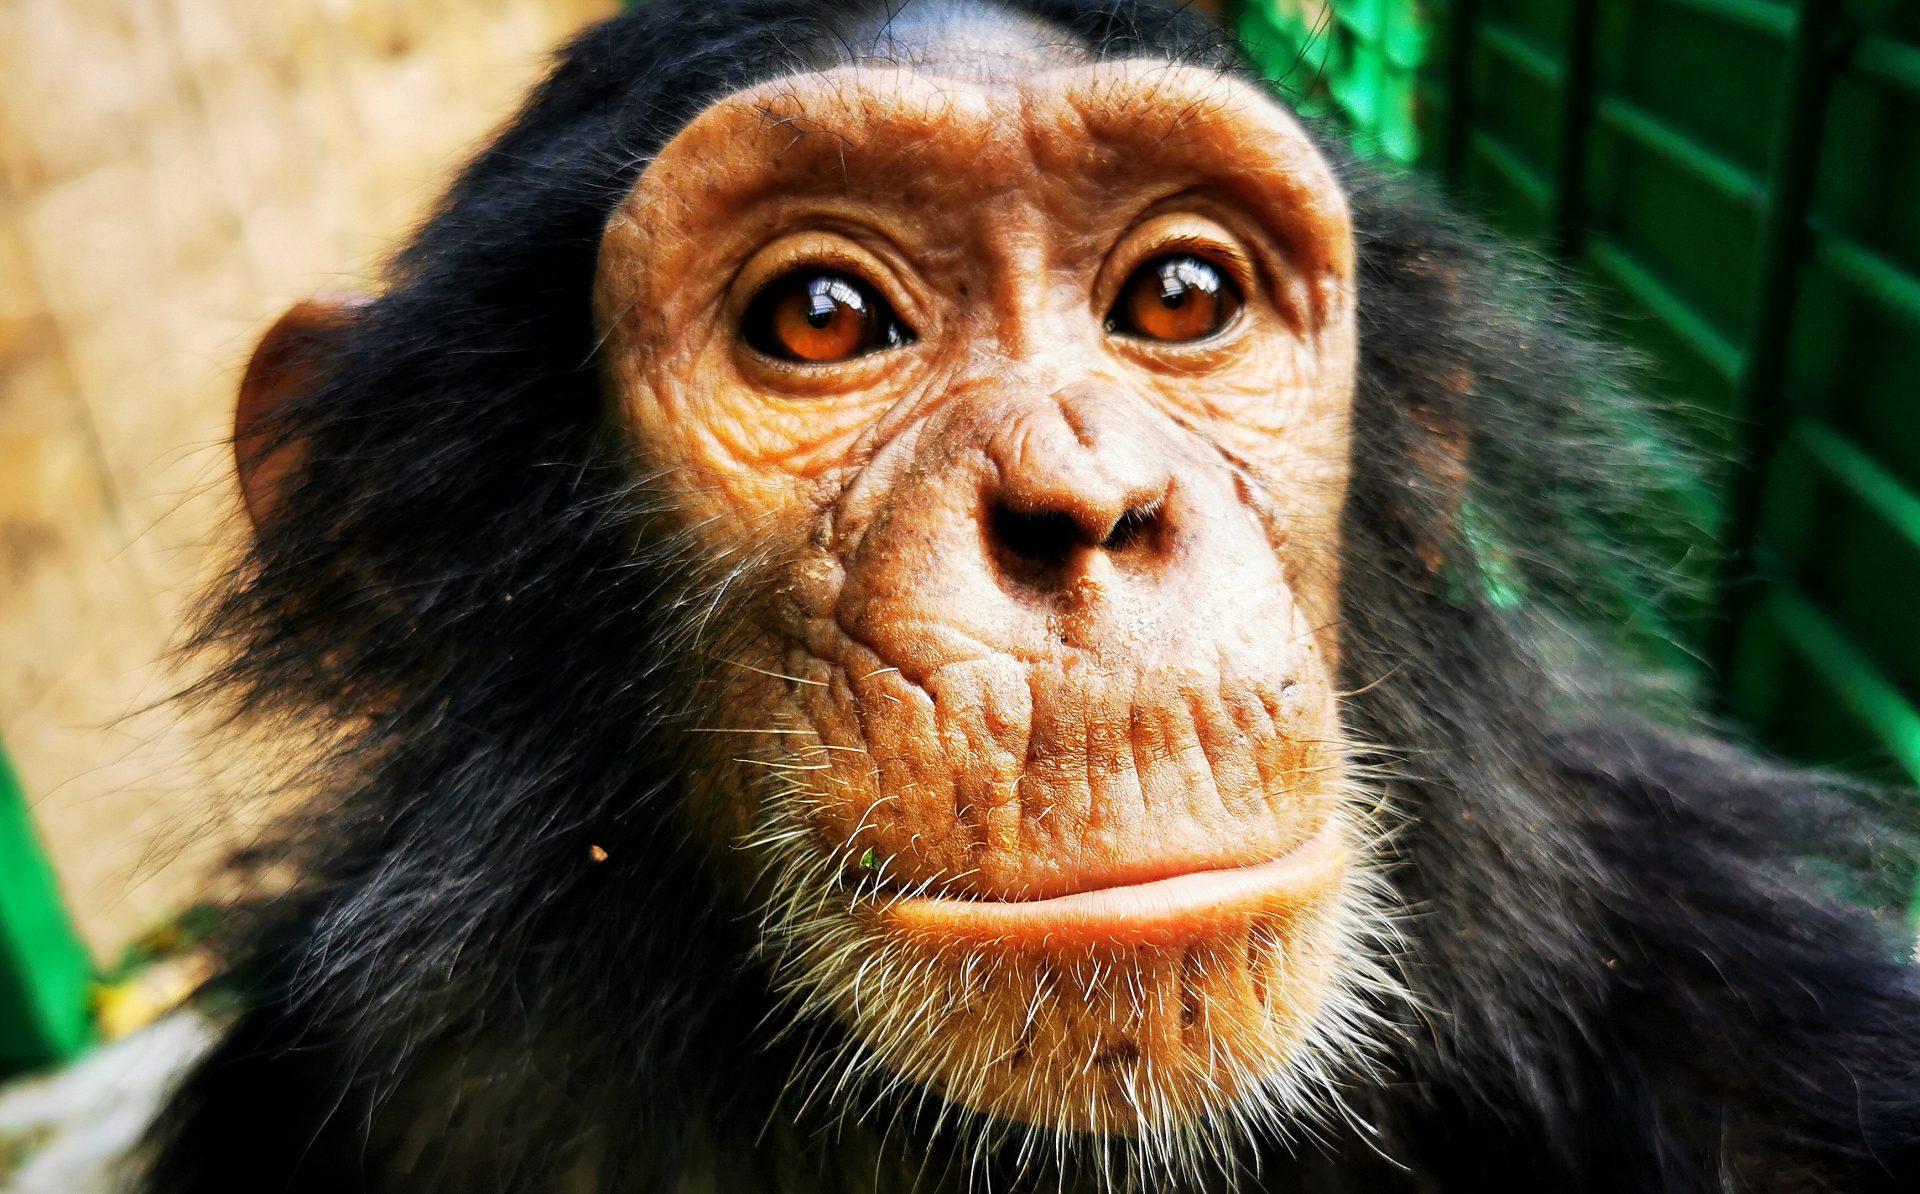 PASA, the chimp with nearly no fur…